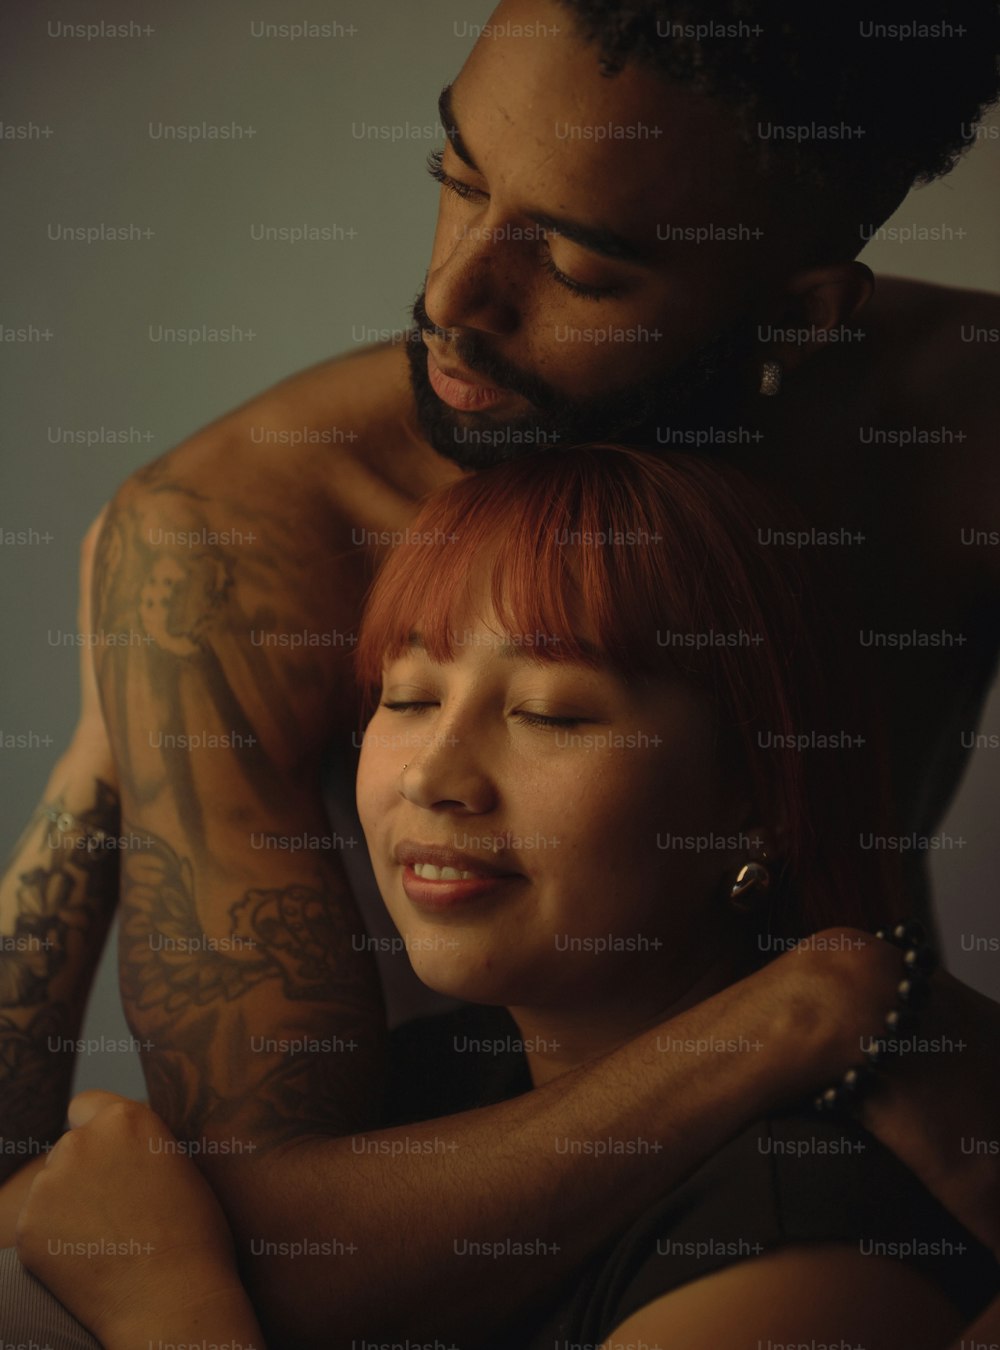 a man and a woman with tattoos on their arms